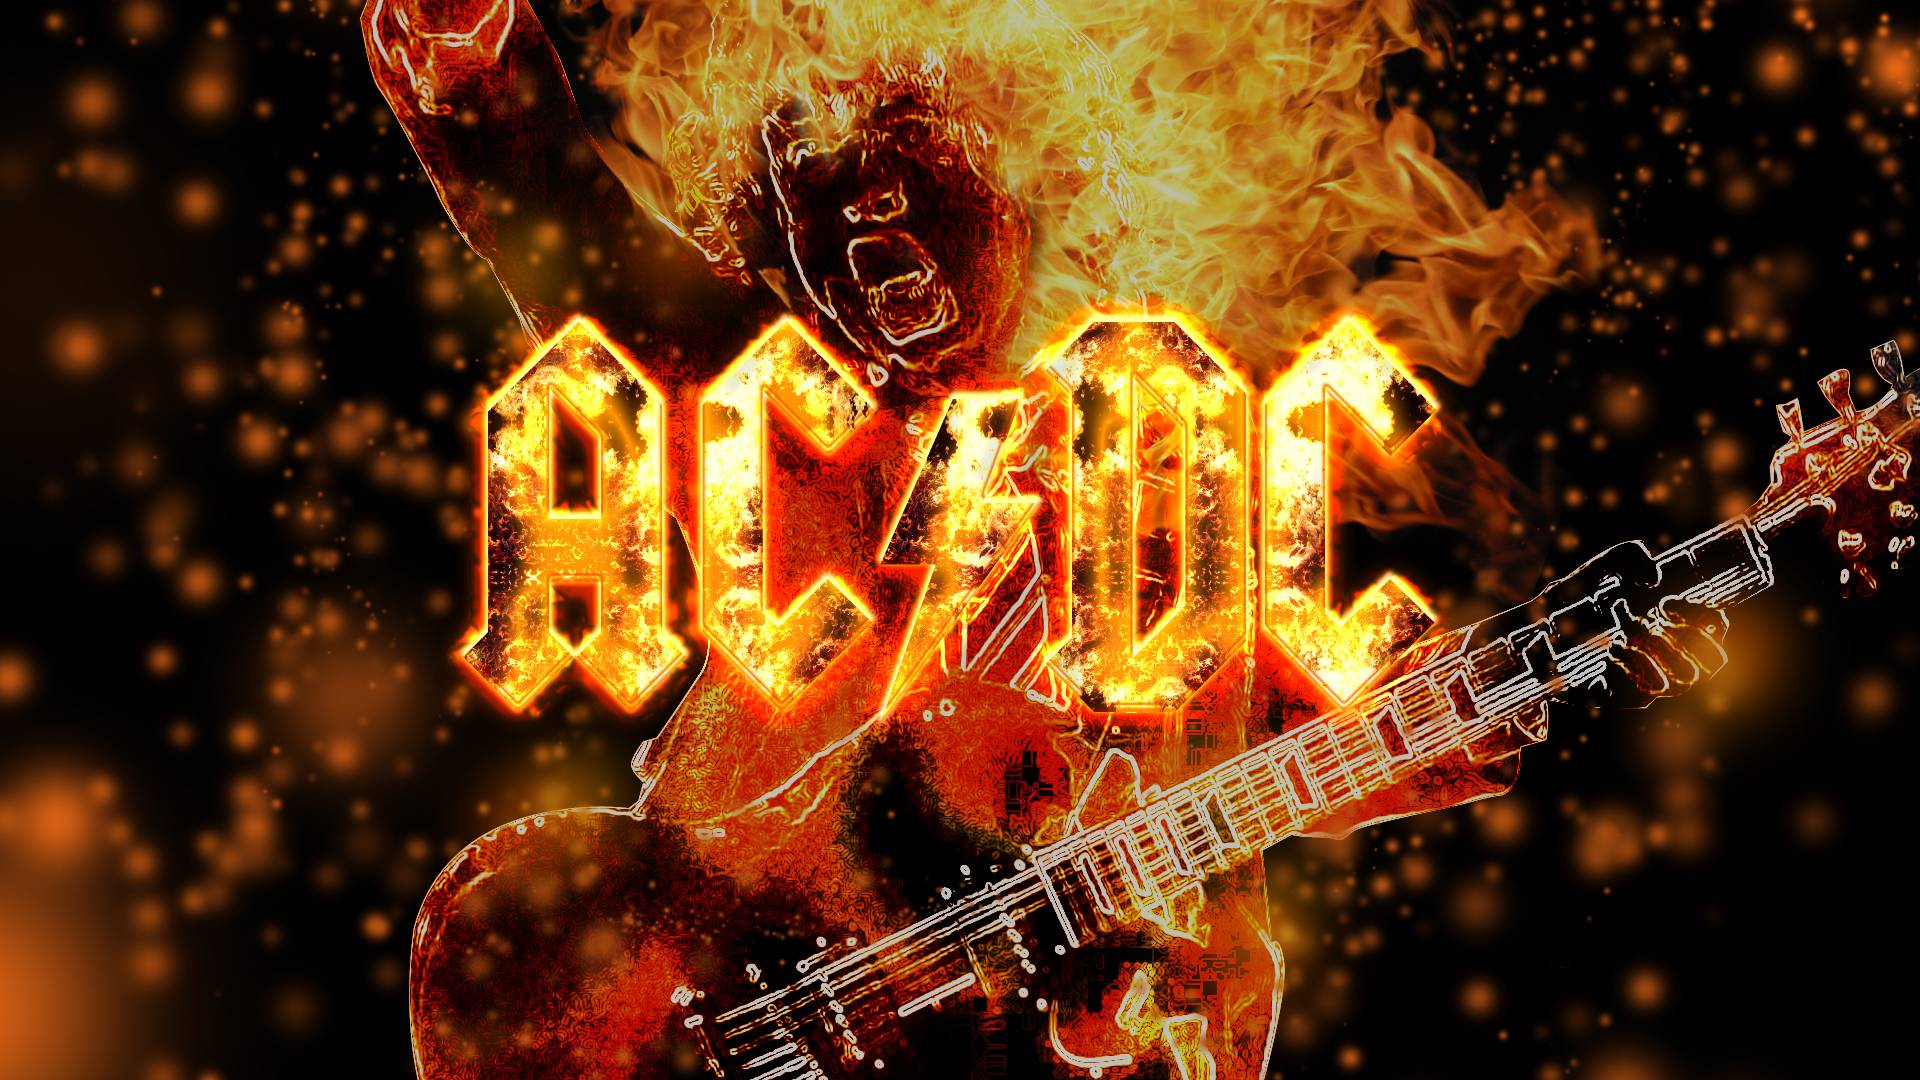 AC|DC backgrounds